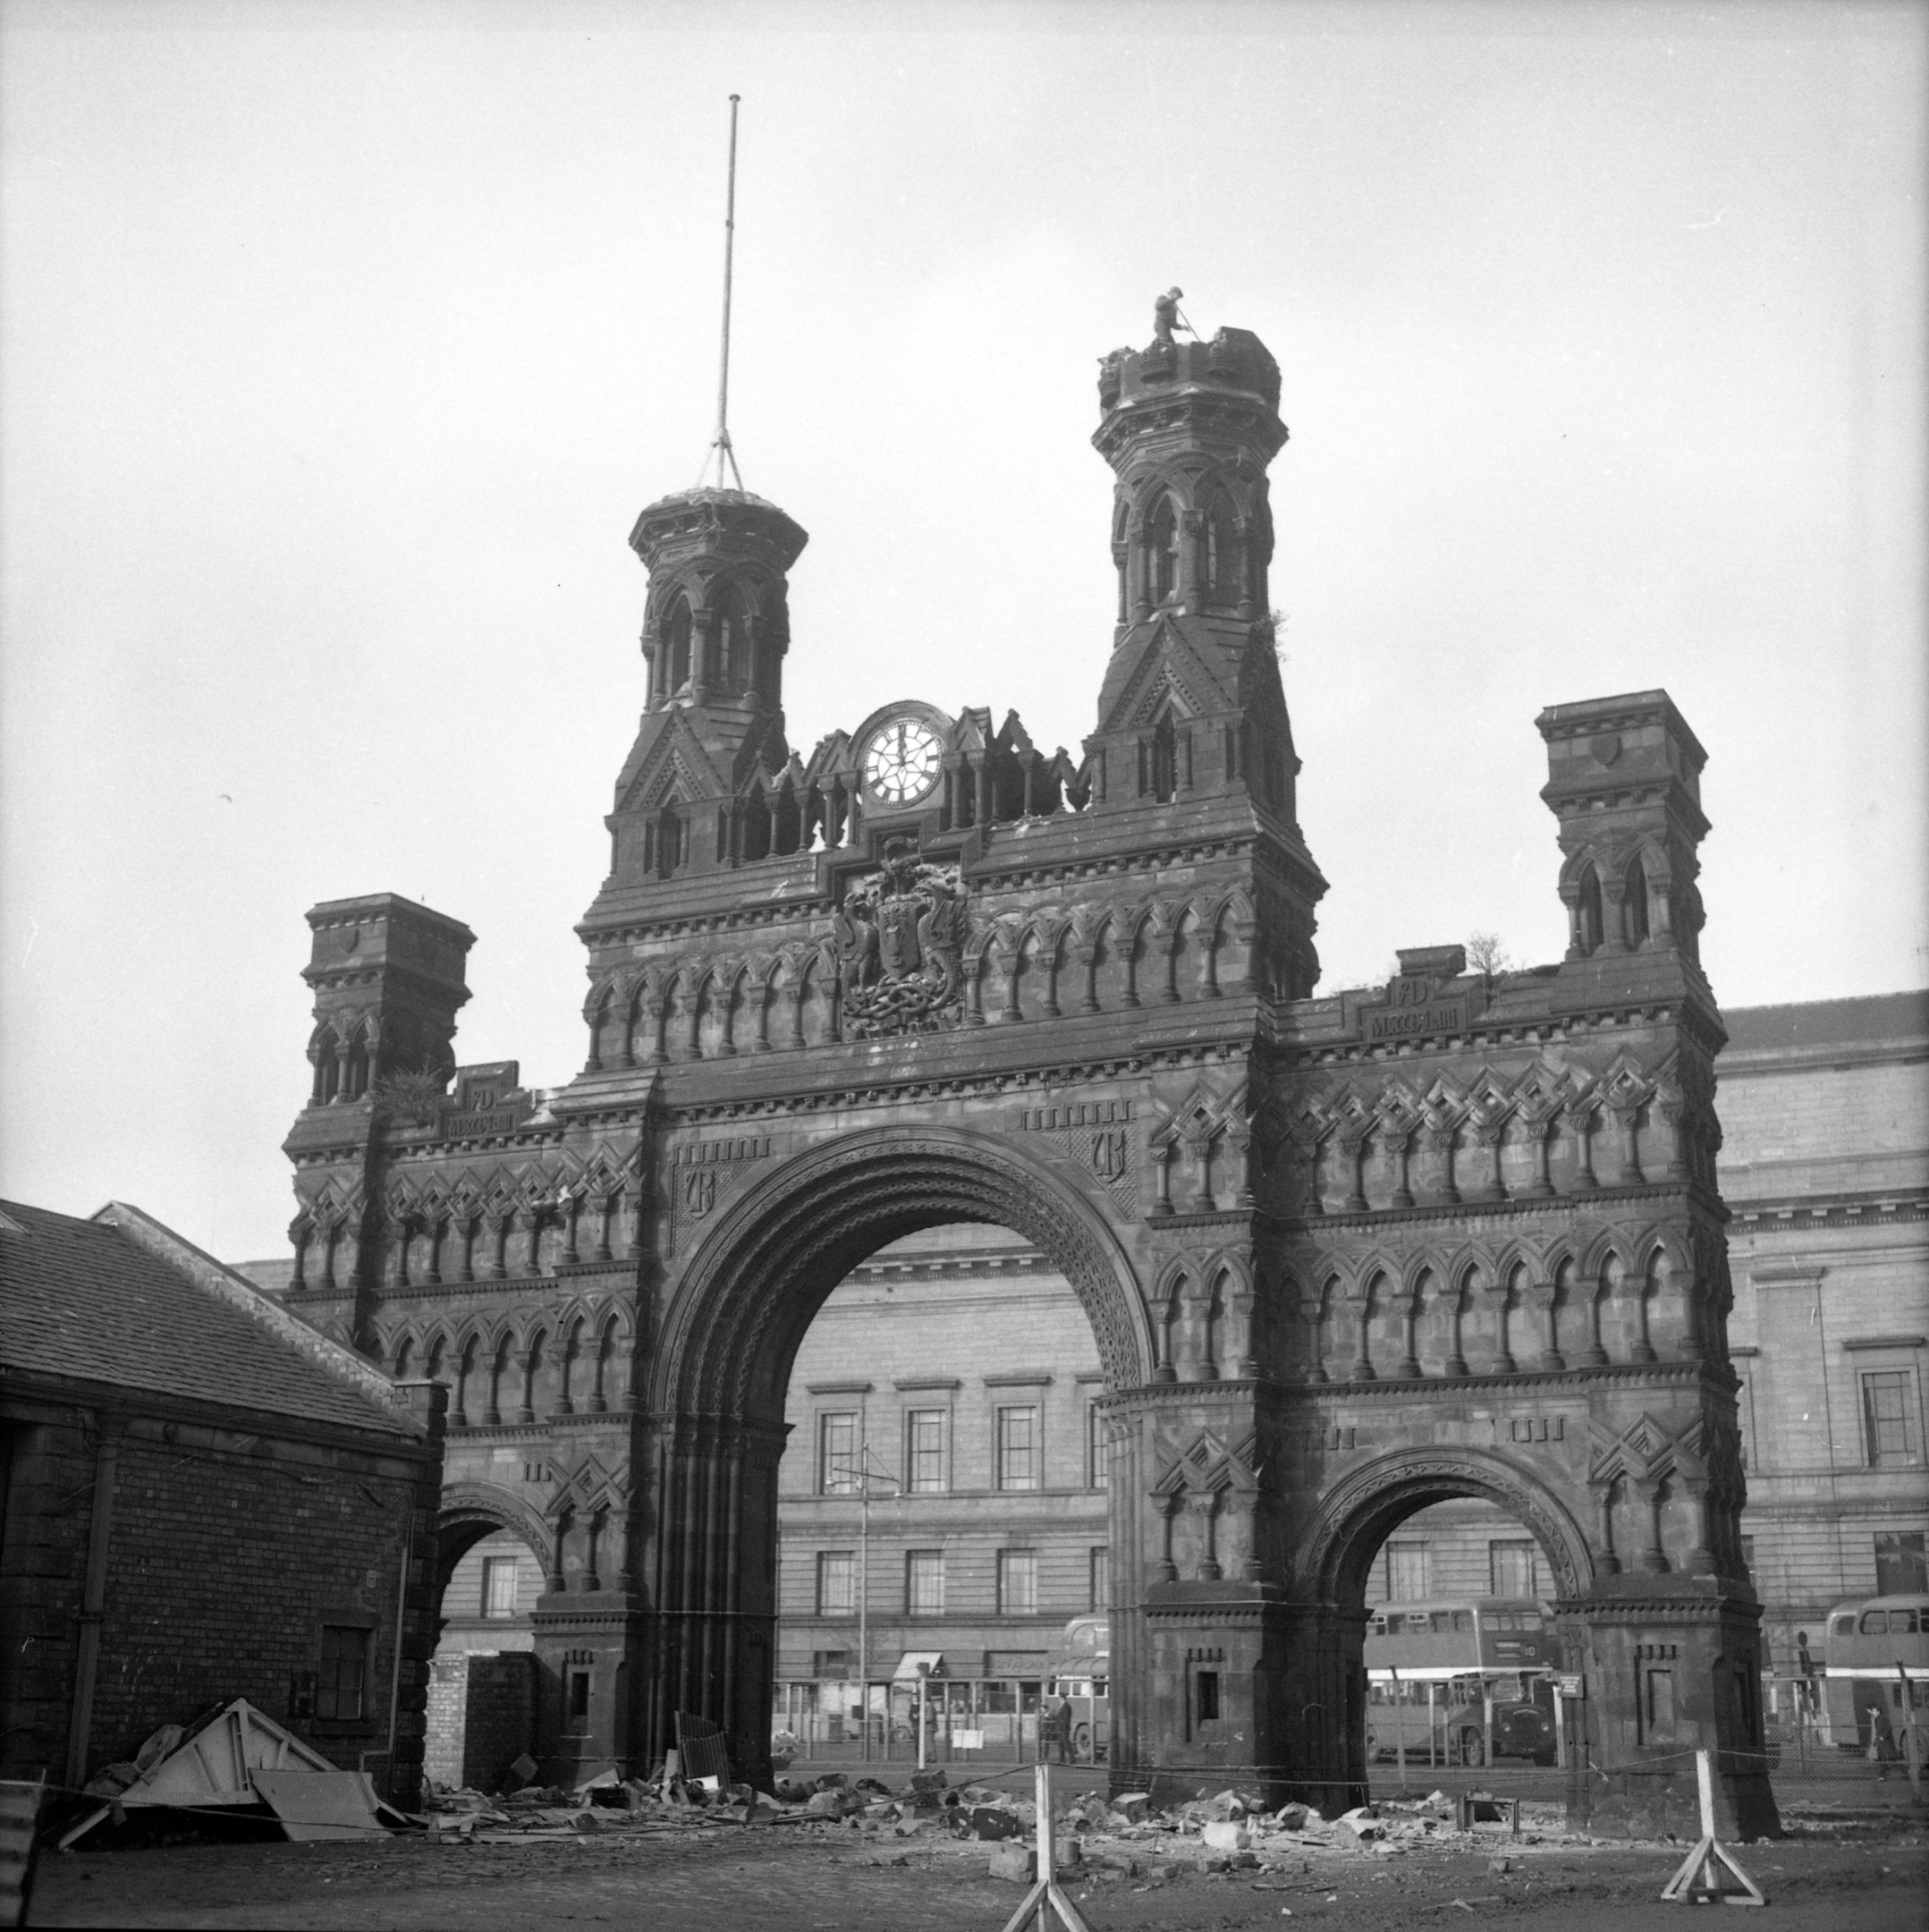 The early stages of the demolition of the Royal Arch in 1964.